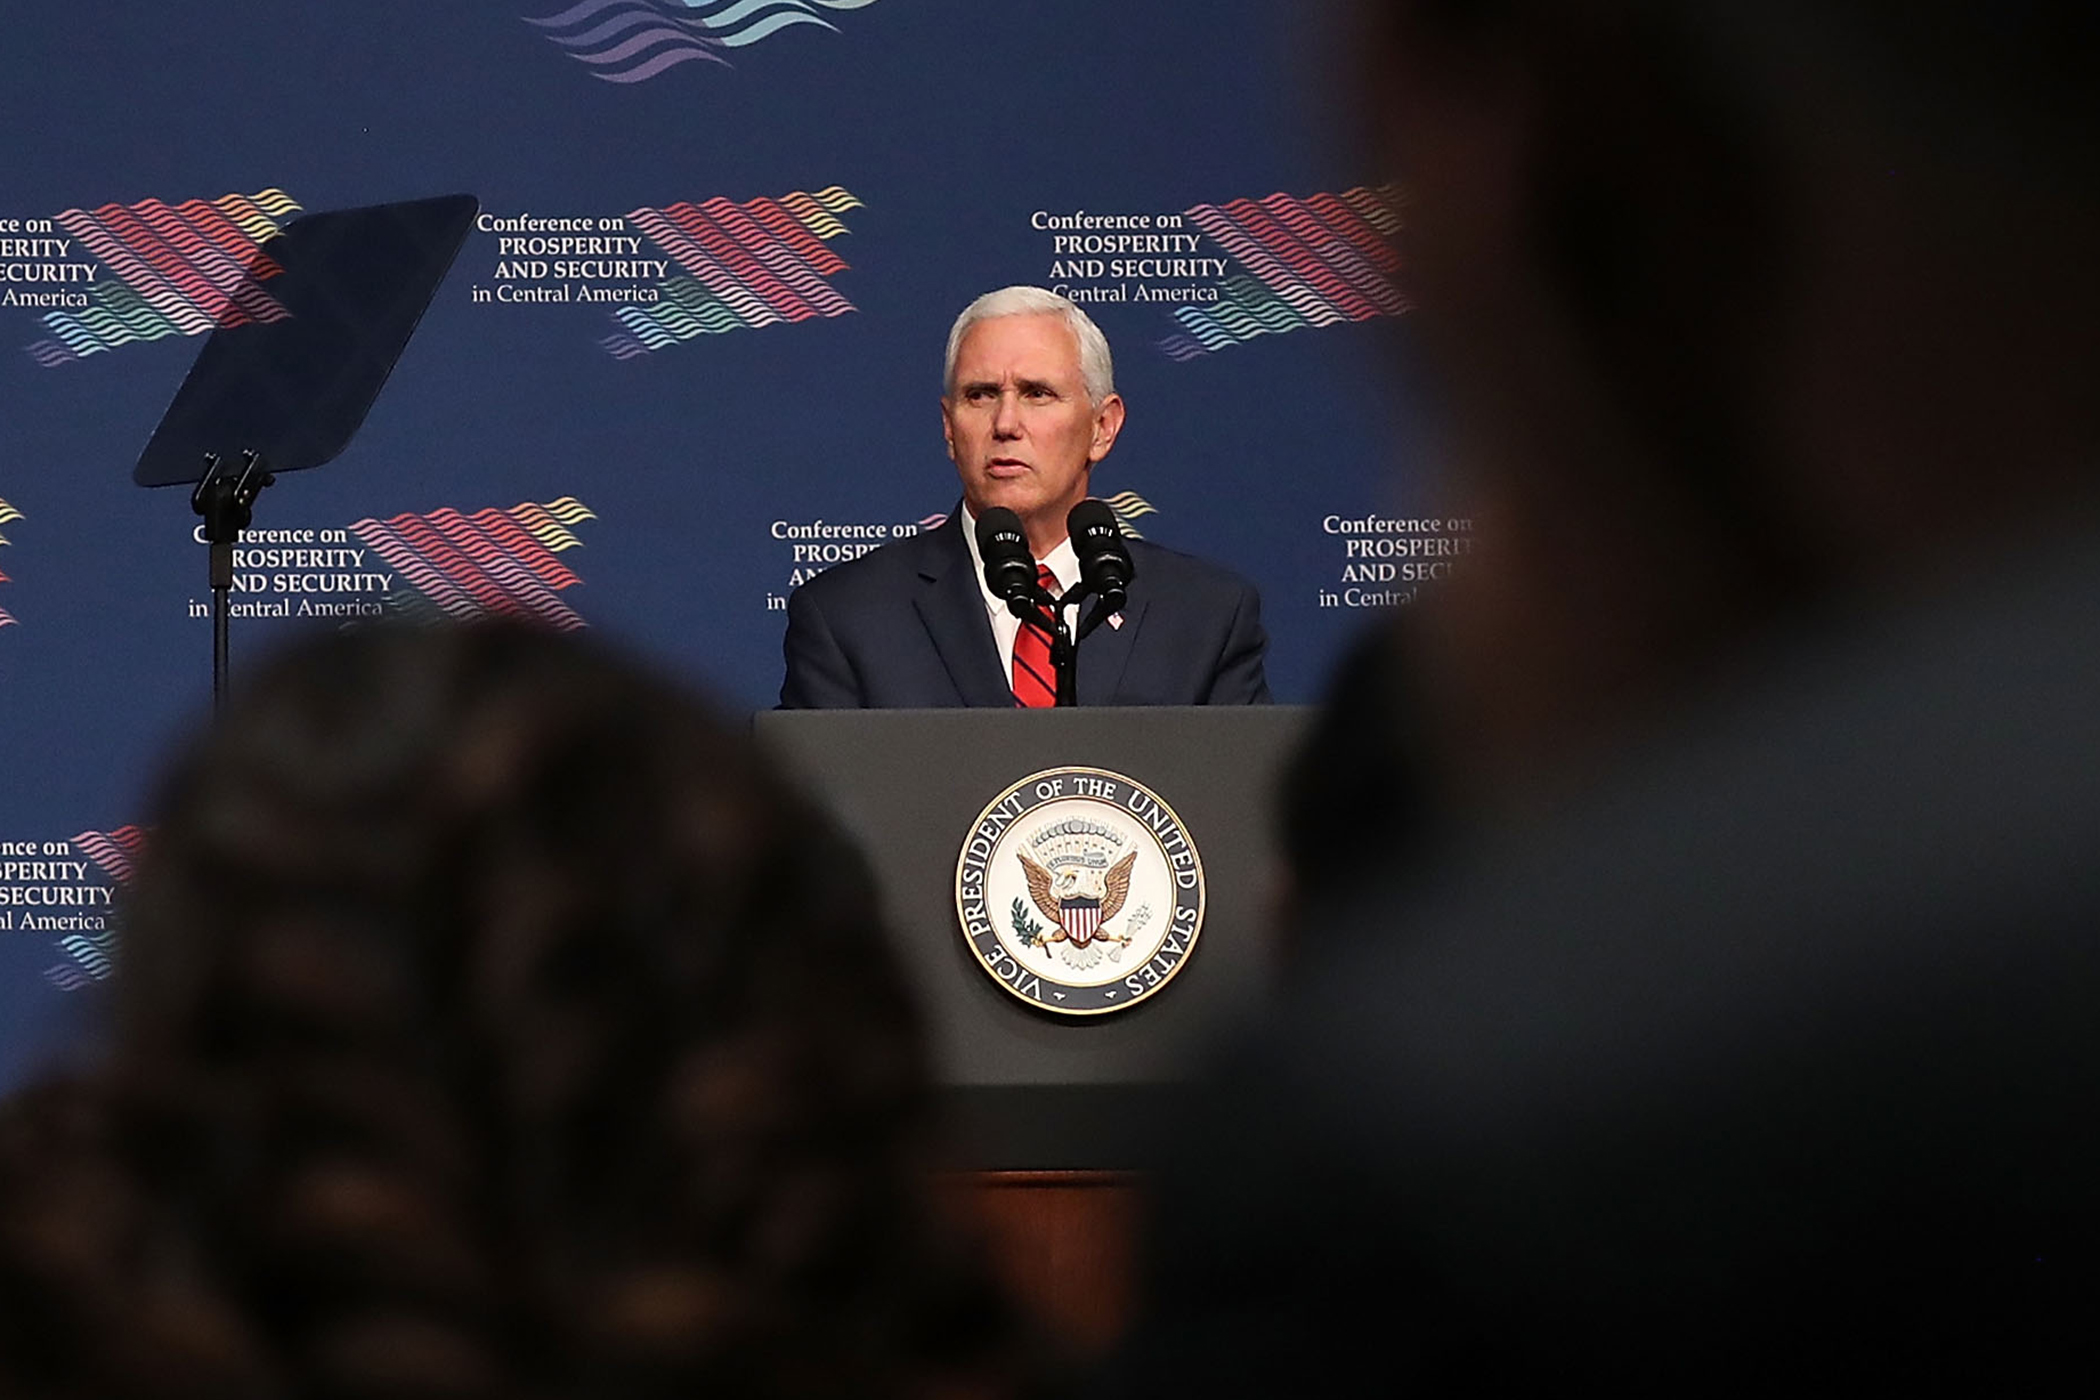 Vice President Mike Pence speaks during the Conference on Prosperity and Security in Central America at the Florida International University on June 15, 2017 in Miami, Florida. The conferance brought together government and business leaders from the United States, Mexico, Central America, and other countries to address the economic, security, and governance challenges and opportunities in El Salvador, Guatemala, and Honduras.  (Photo by Joe Raedle/Getty Images) (Joe Raedle&mdash;Getty Images)